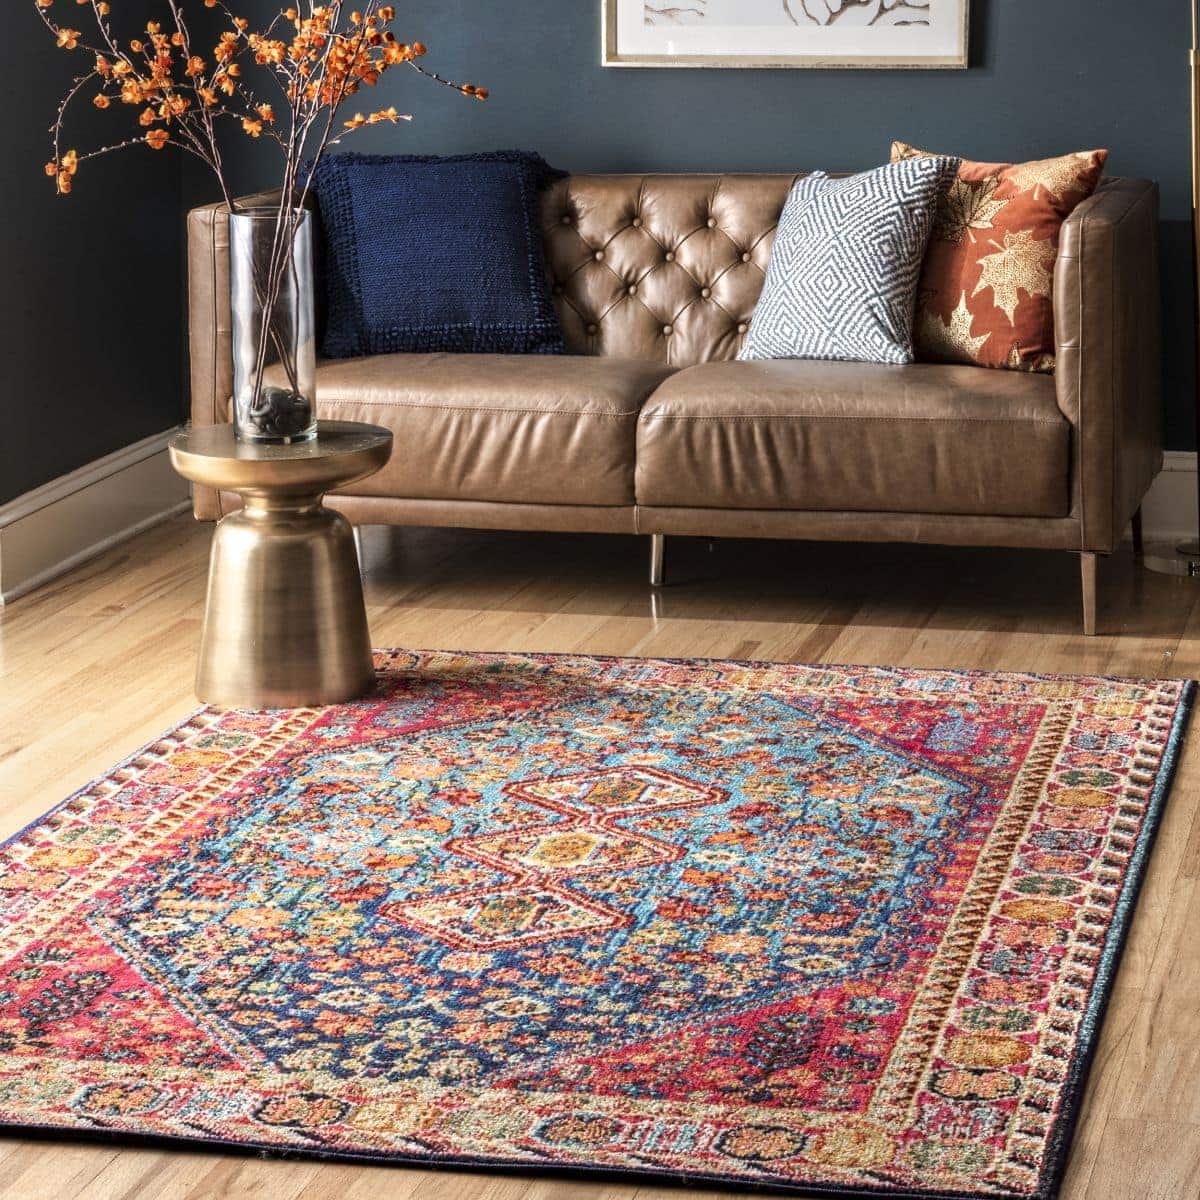 hoek Overdreven in tegenstelling tot 25 Gorgeous Rugs That Go With Brown Couches